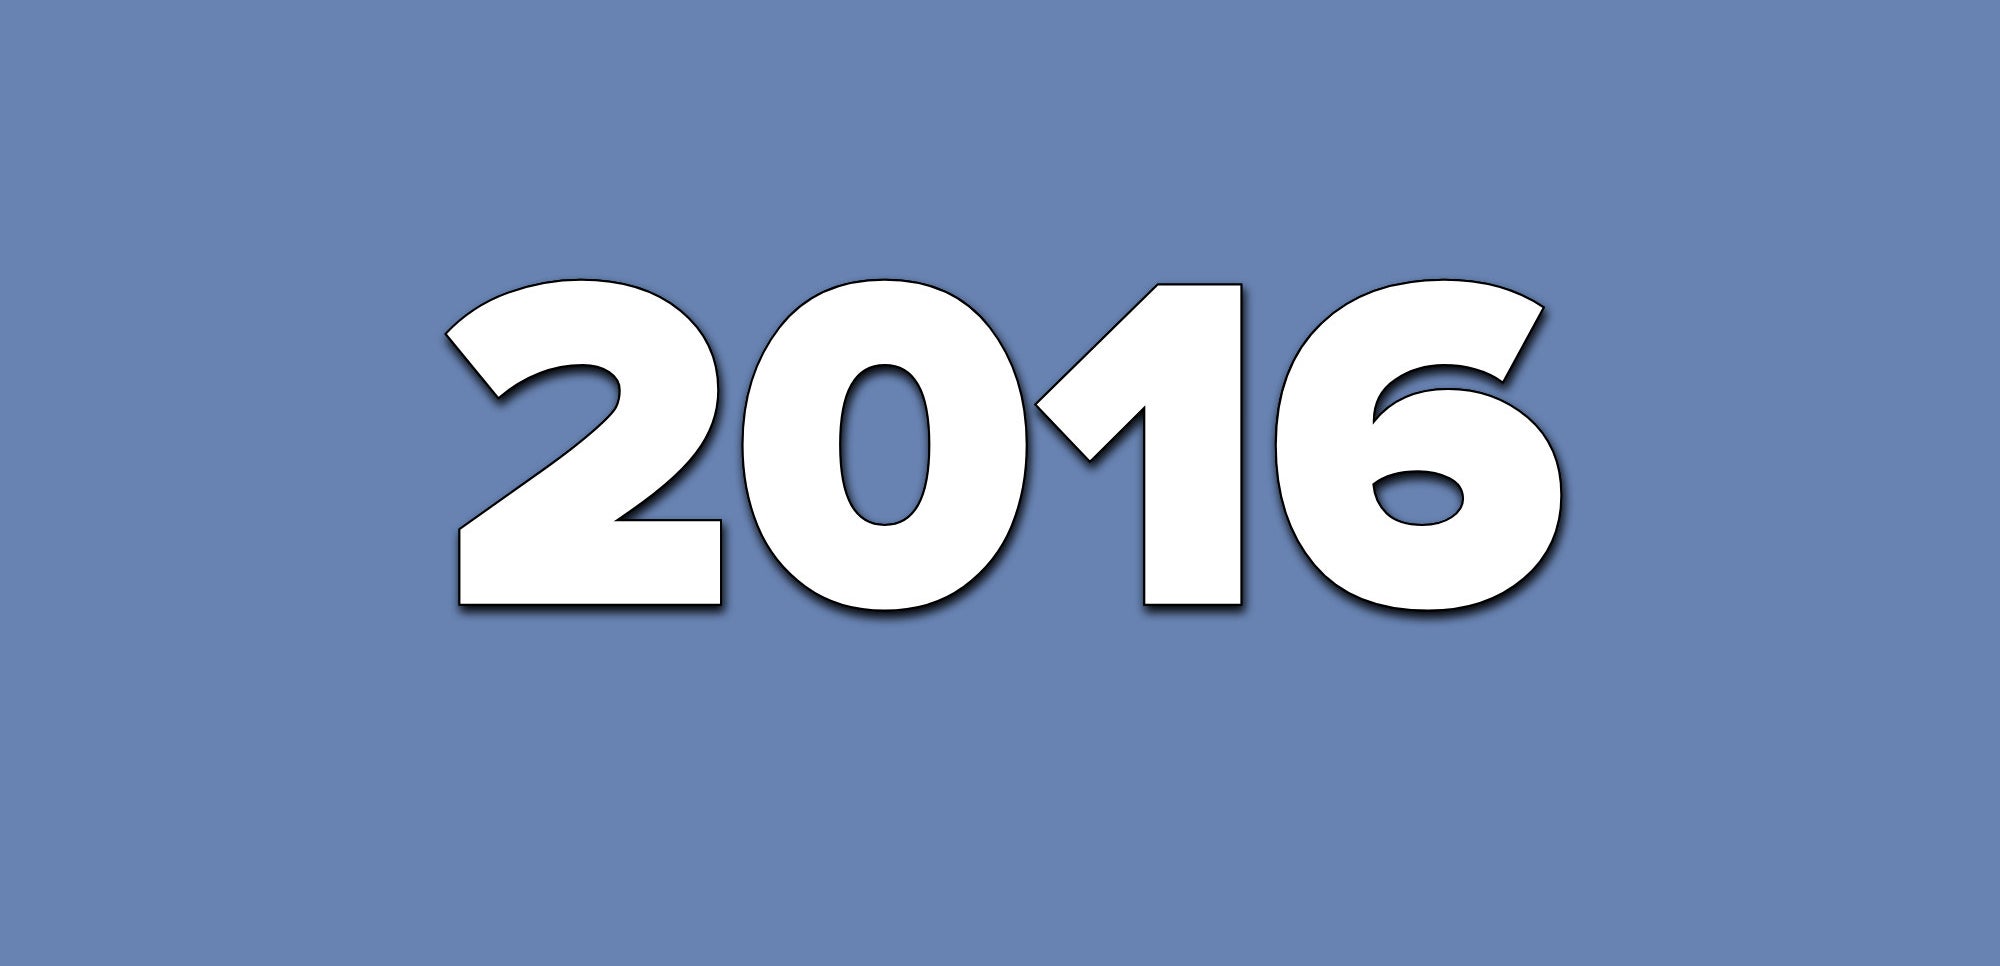 A blue background with text that says 2016